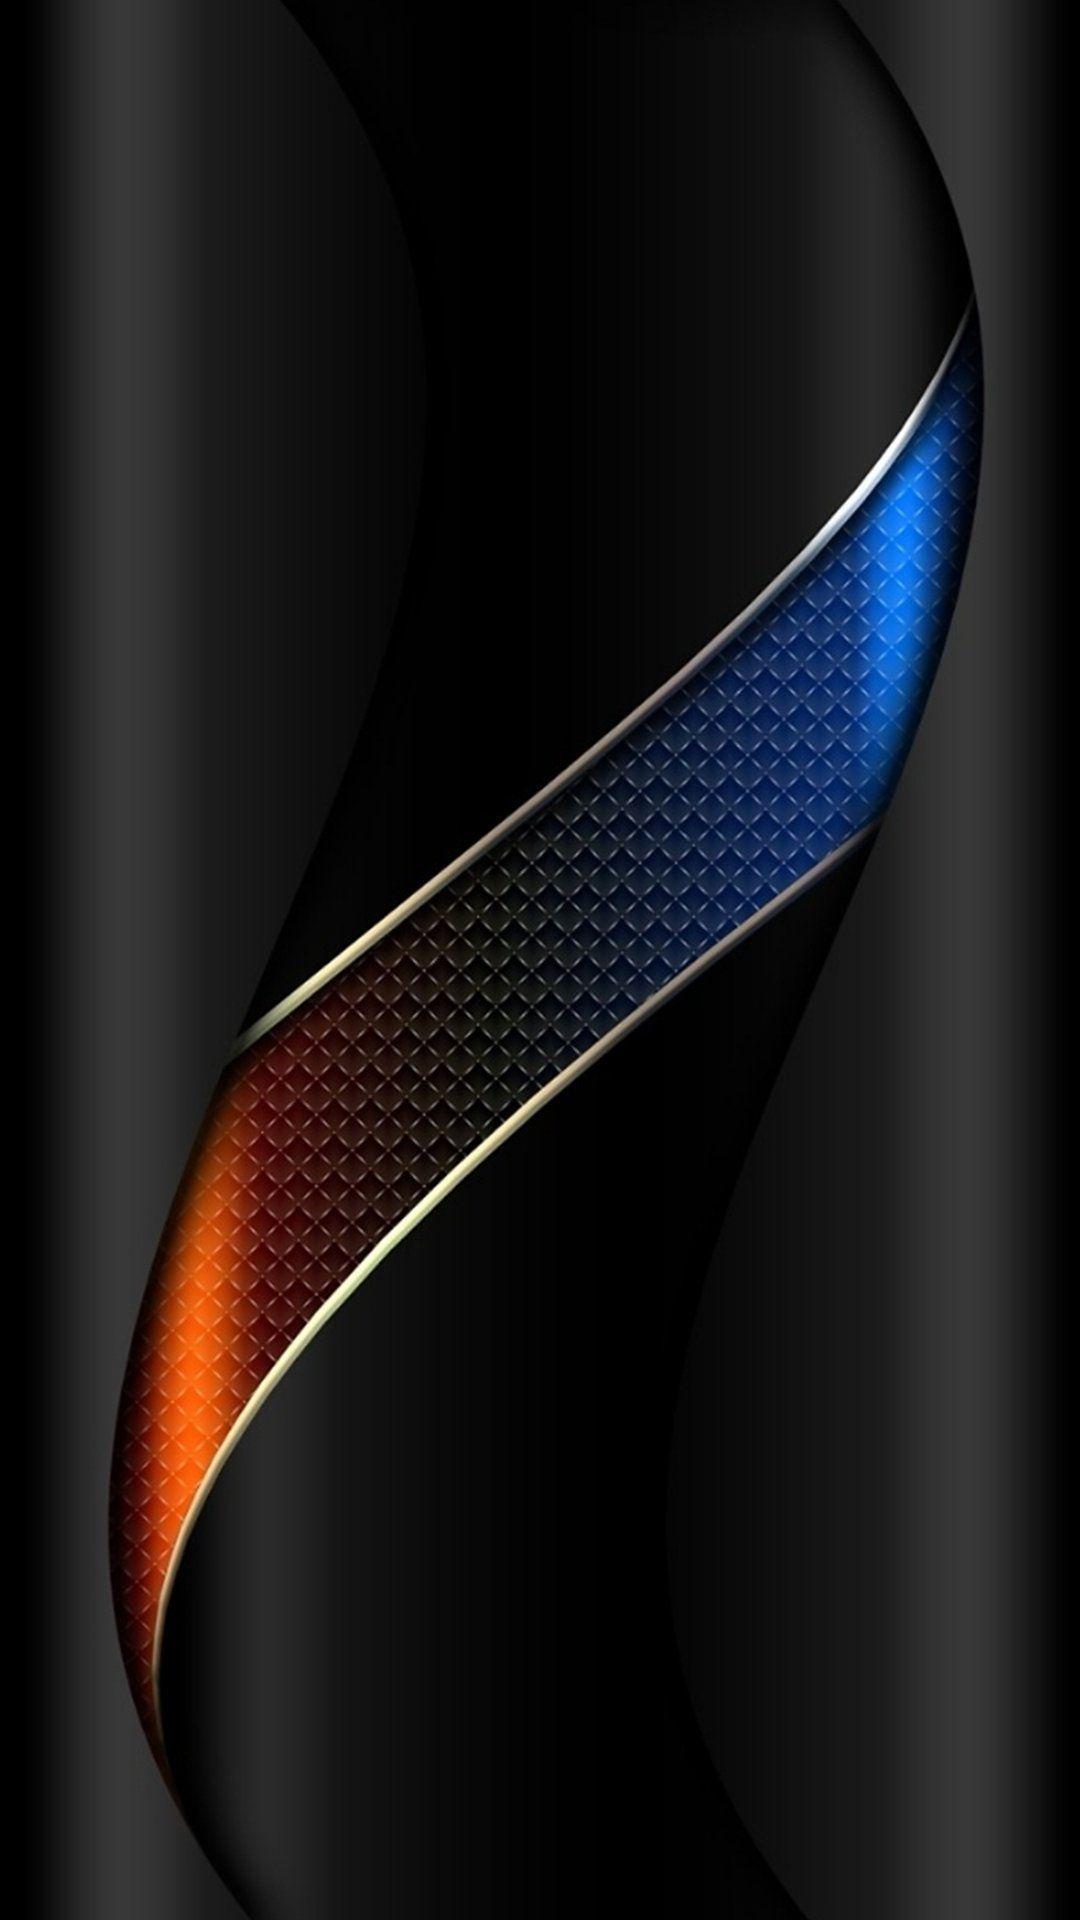 Manly Iphone Wallpapers Top Free Manly Iphone Backgrounds Images, Photos, Reviews